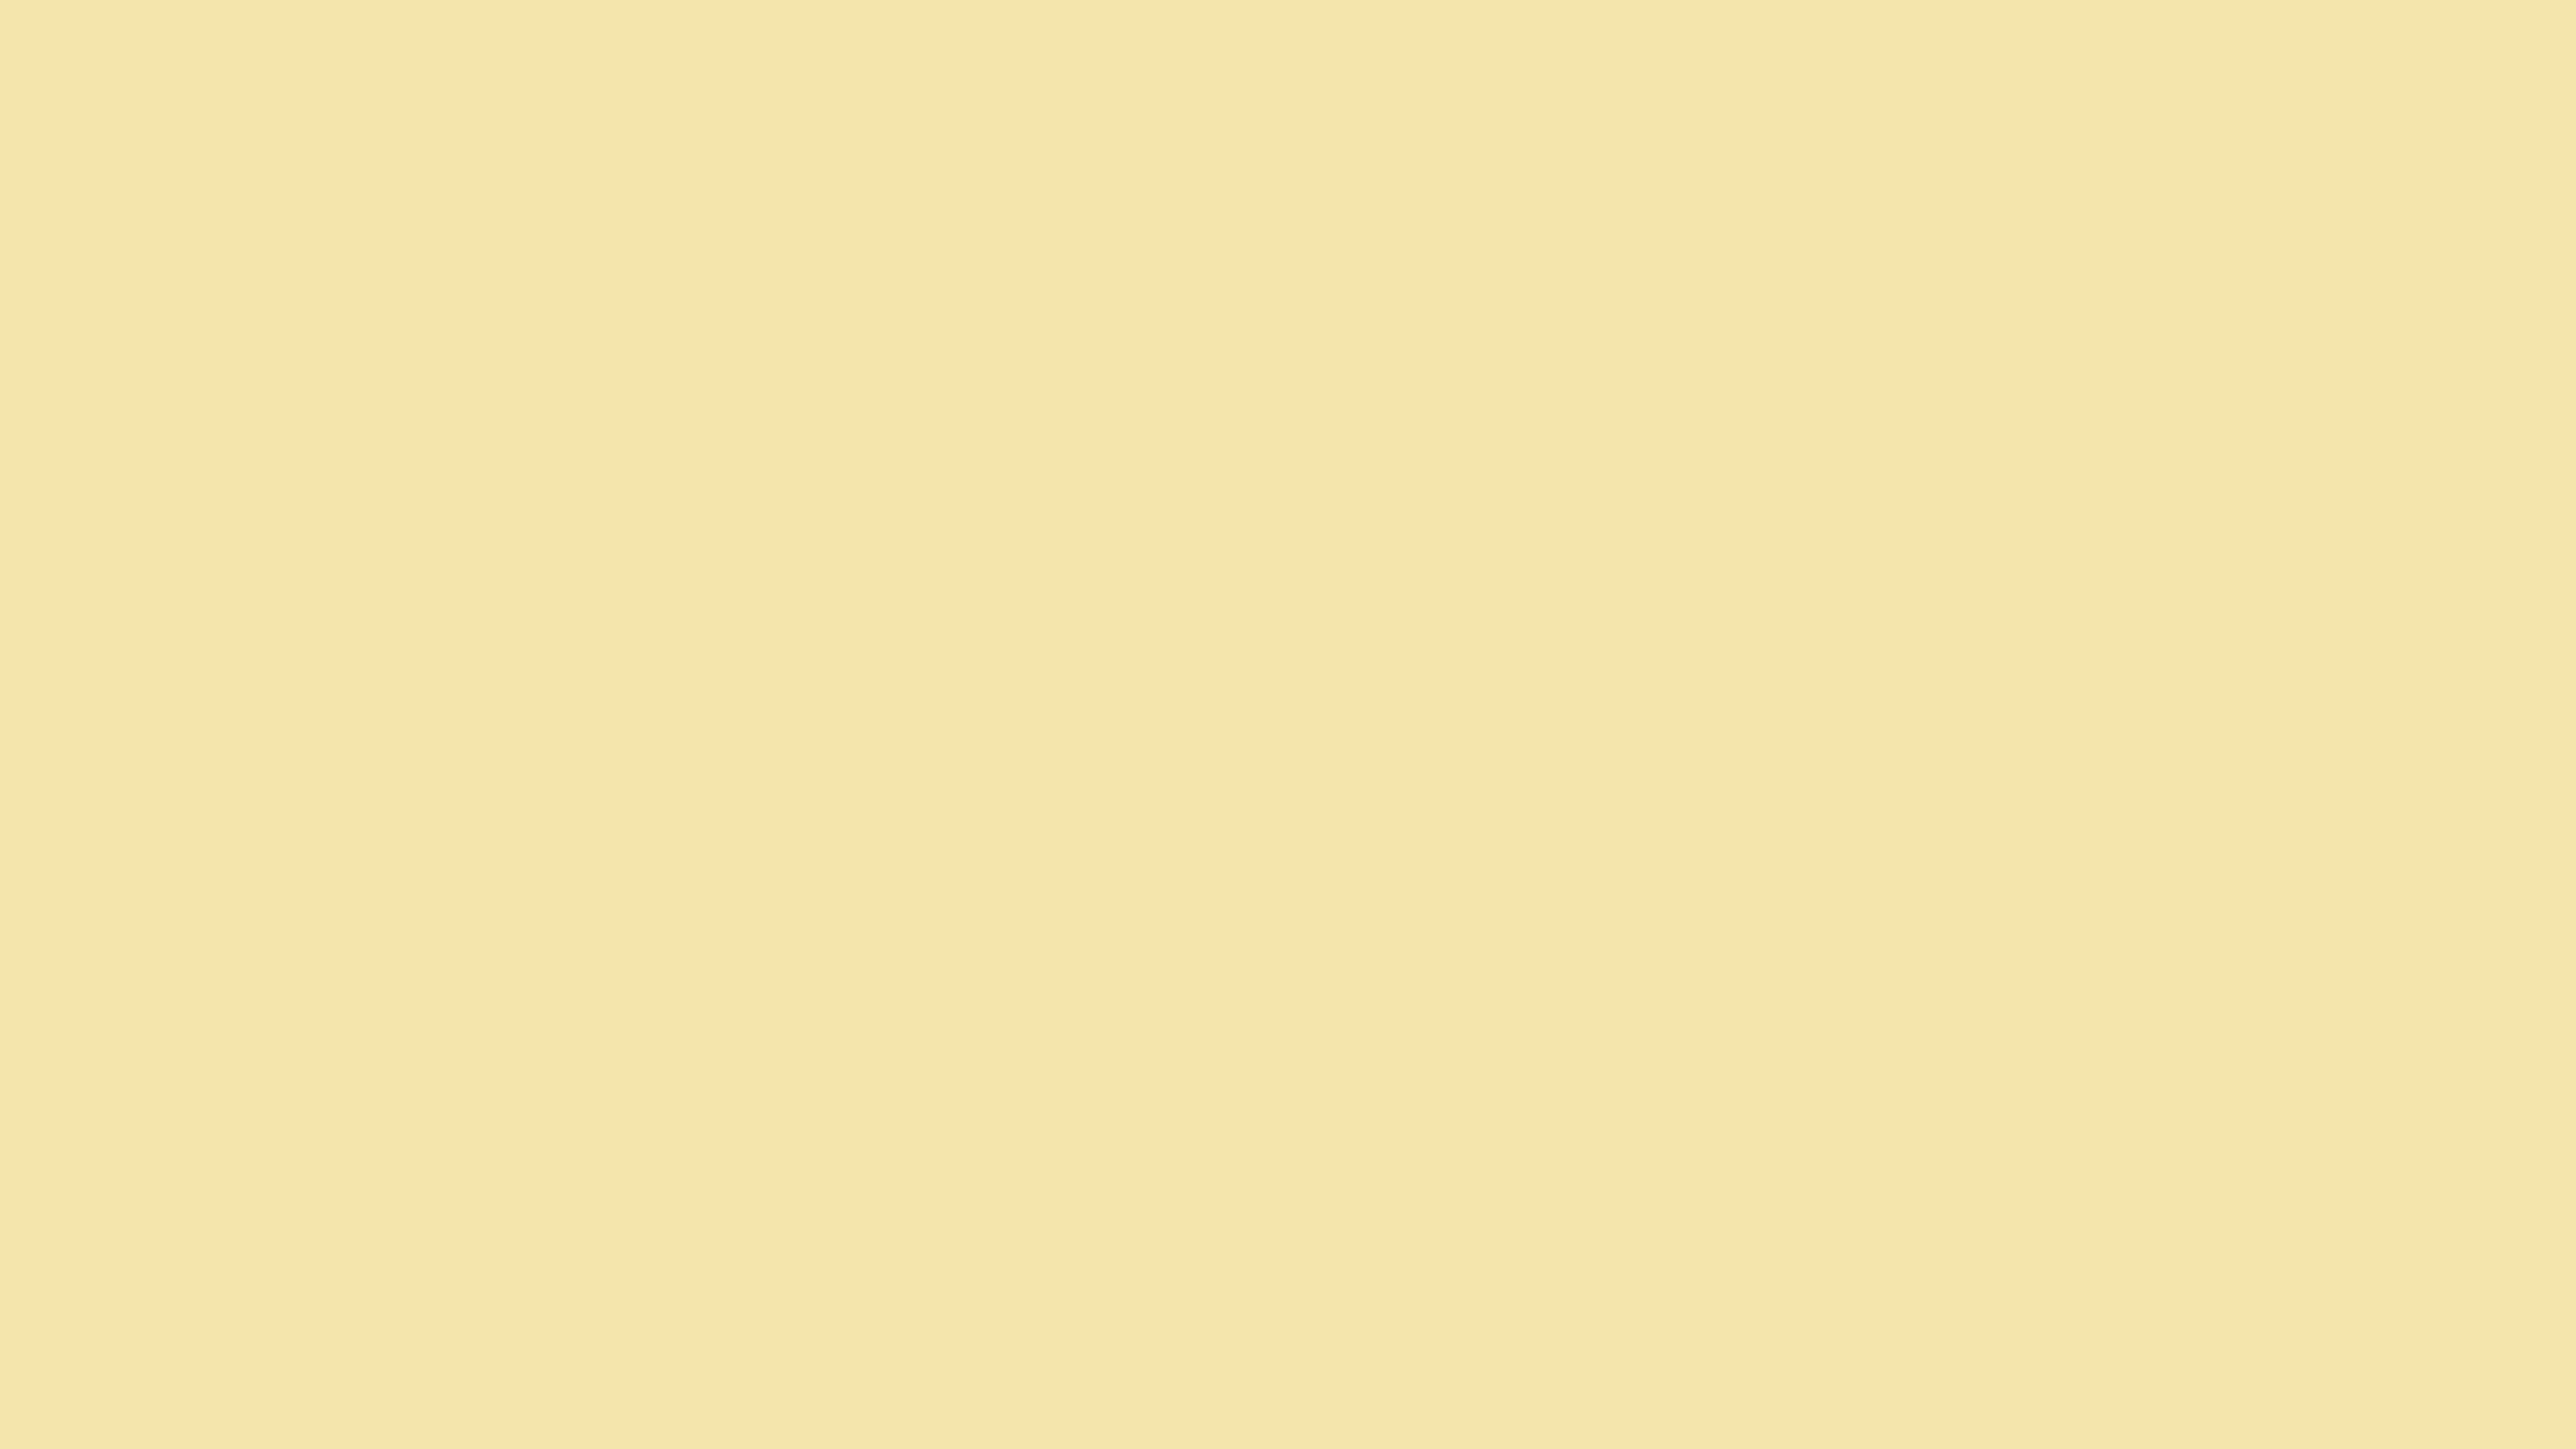 7680x4320 Medium Champagne Solid Color Background